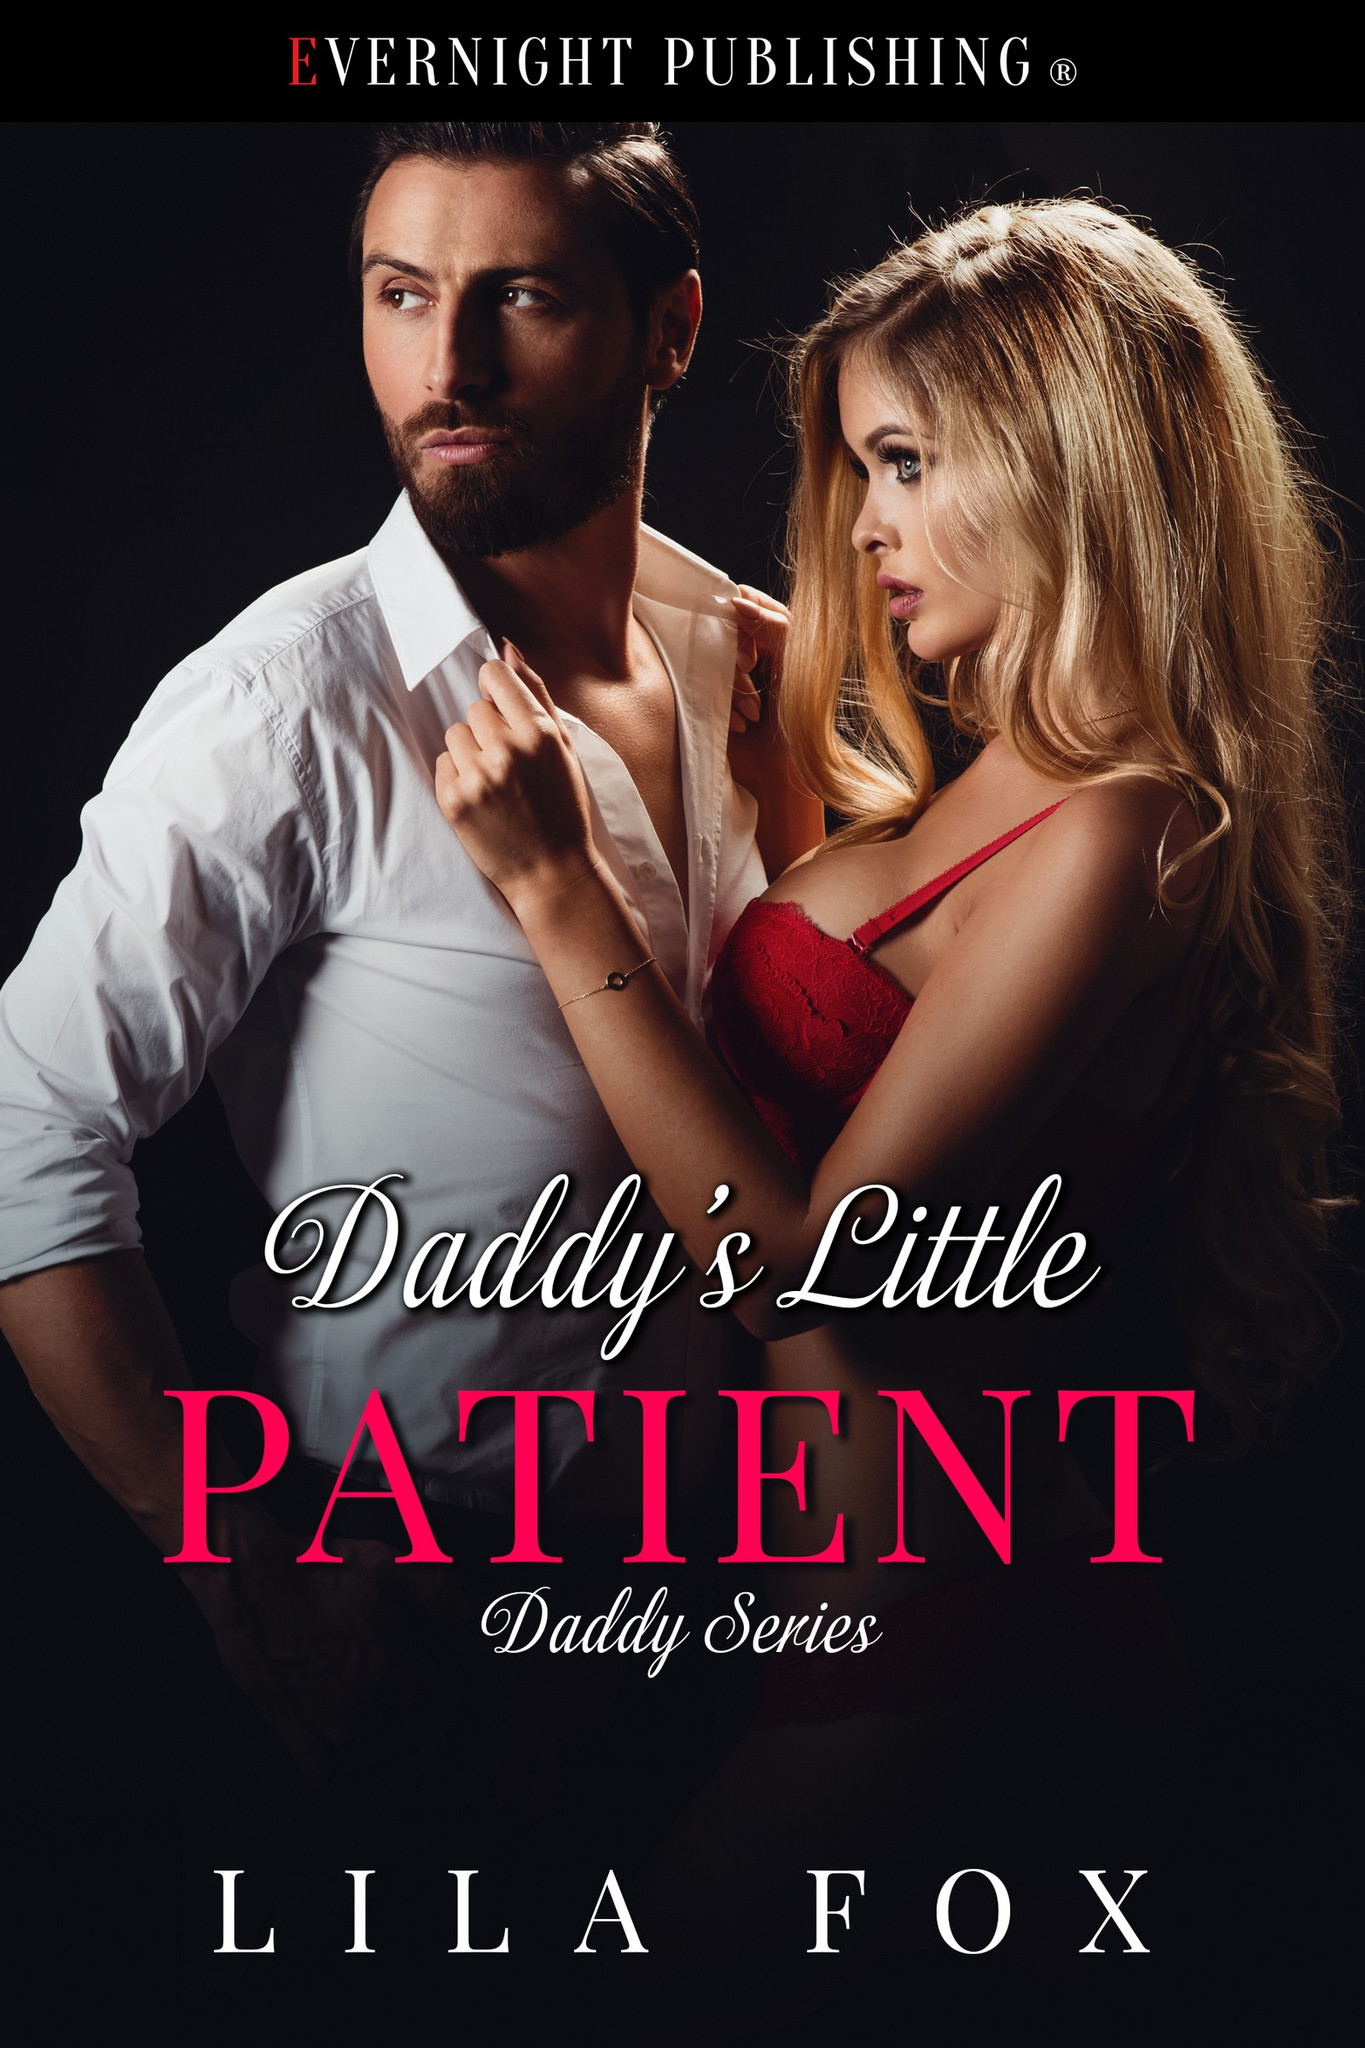 Daddys Little Patient by Lila pic